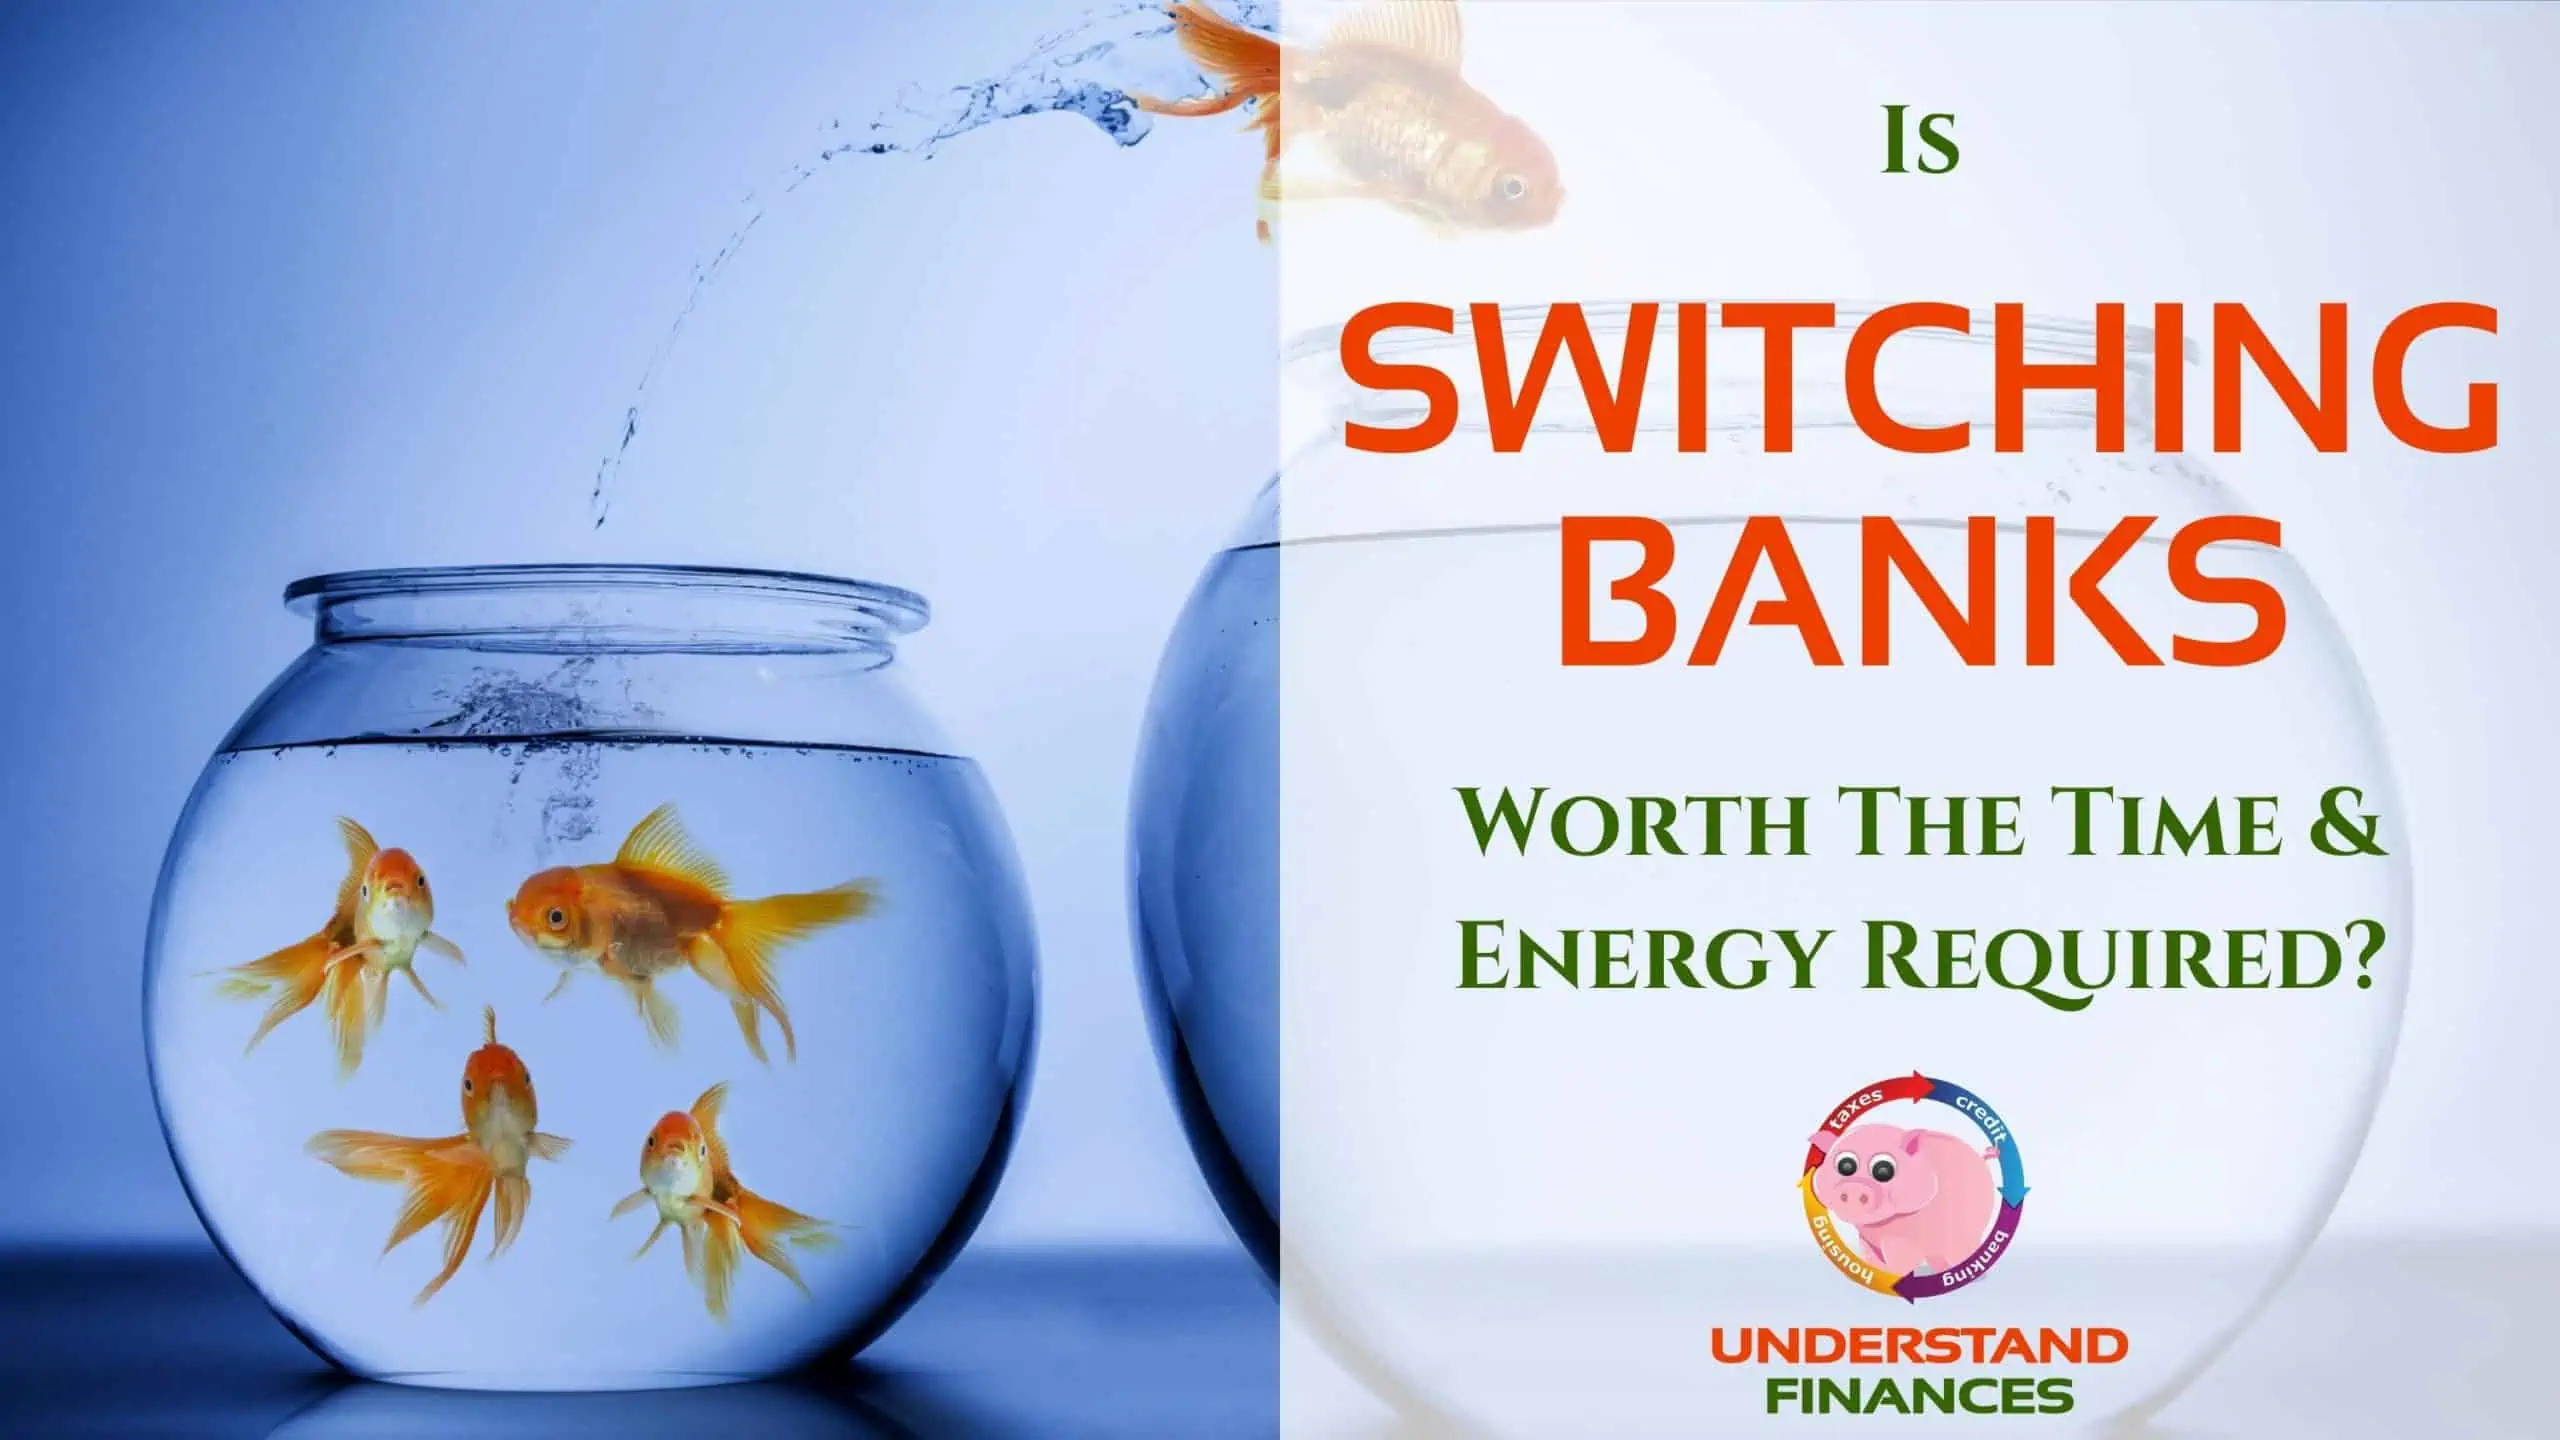 Is Switching Banks Worth The Time & Energy Required?